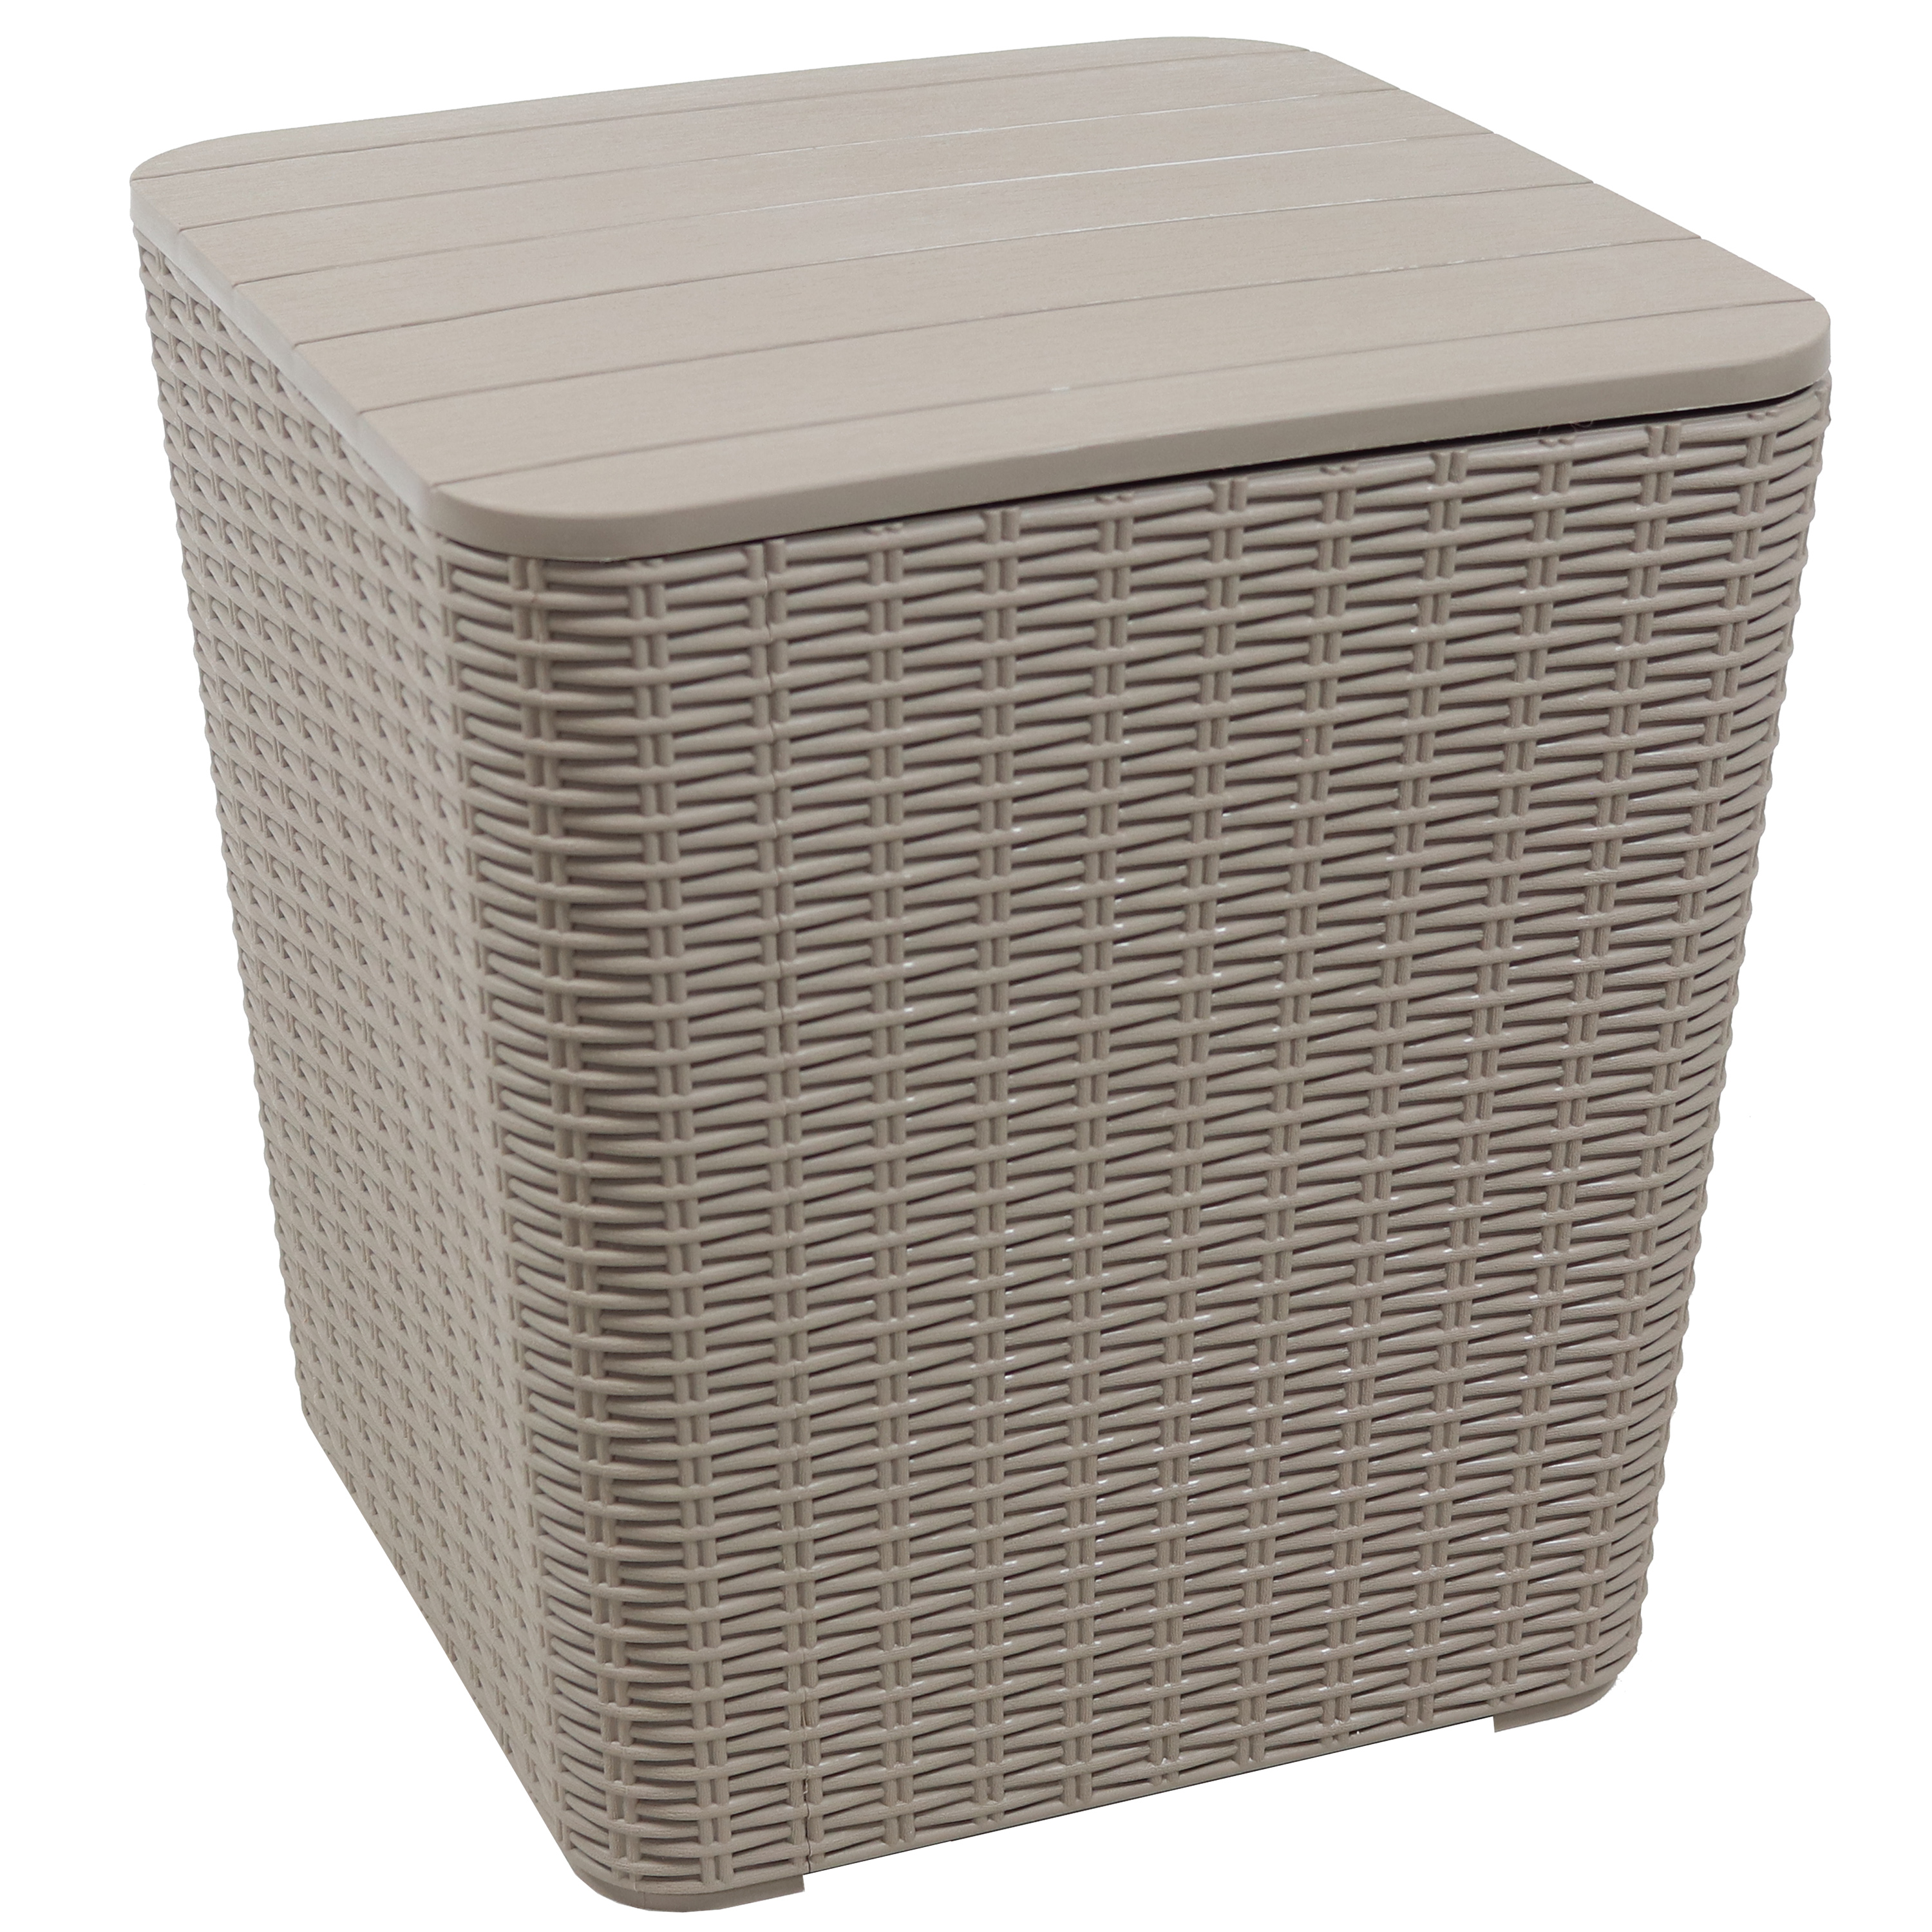 Rattan Design Outdoor Storage Box with Faux Wood Tabletop - Driftwood